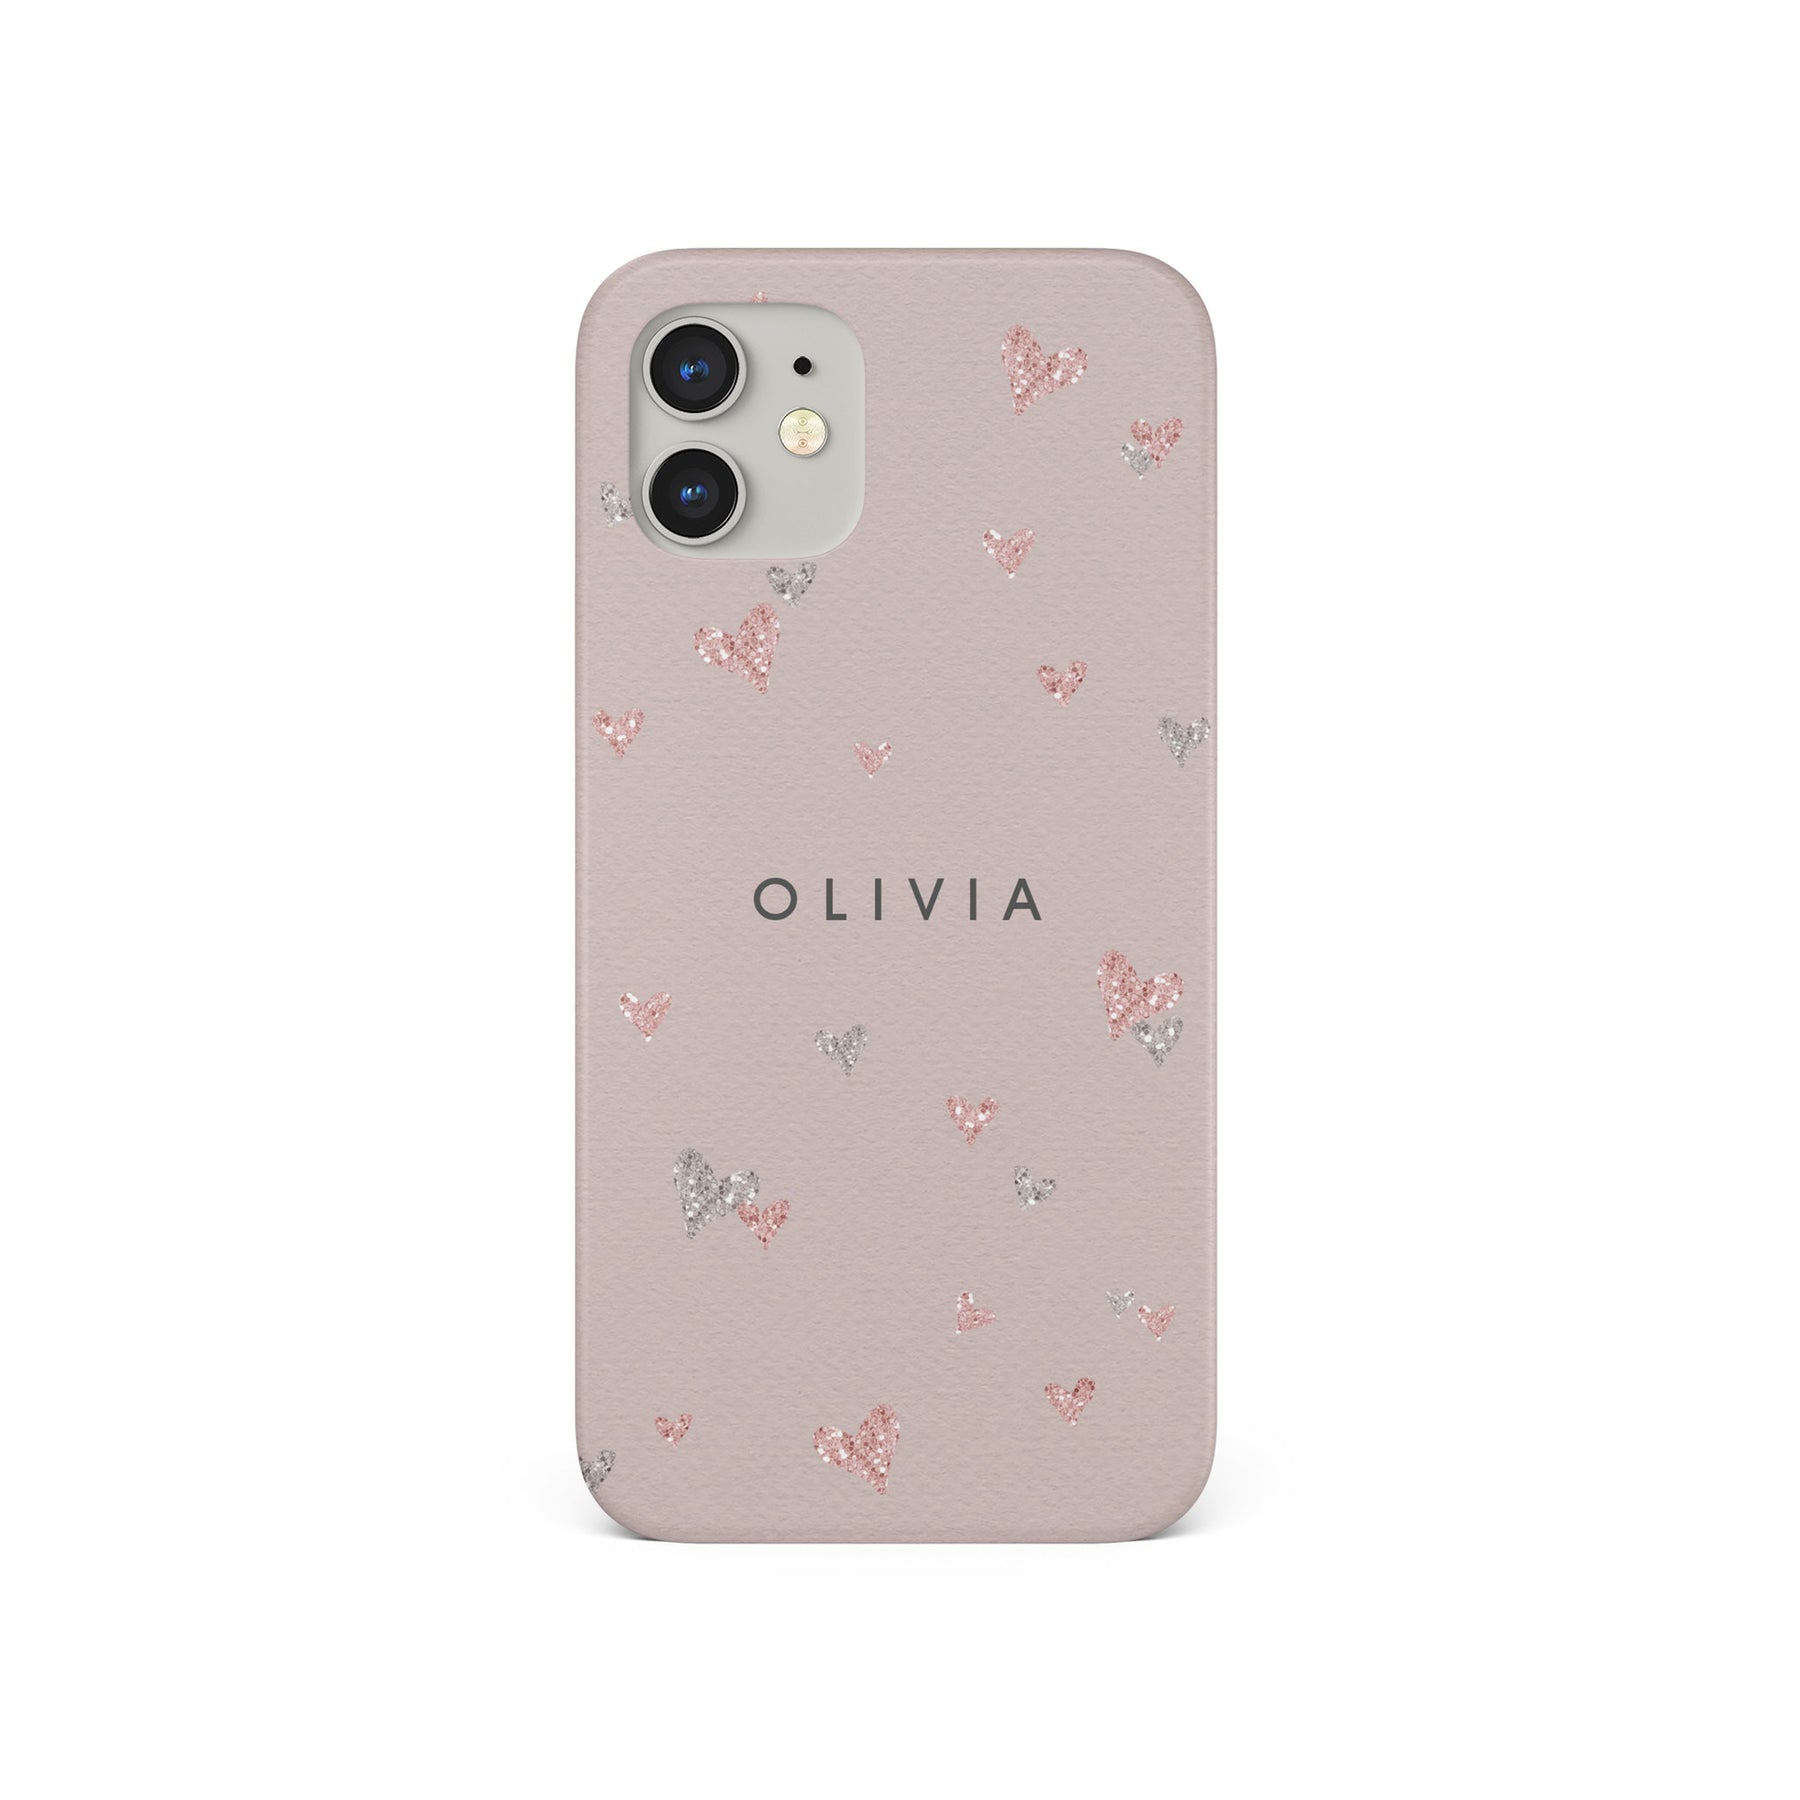 Personalised Hard Phone Case Hearts Pink Silver Glitter